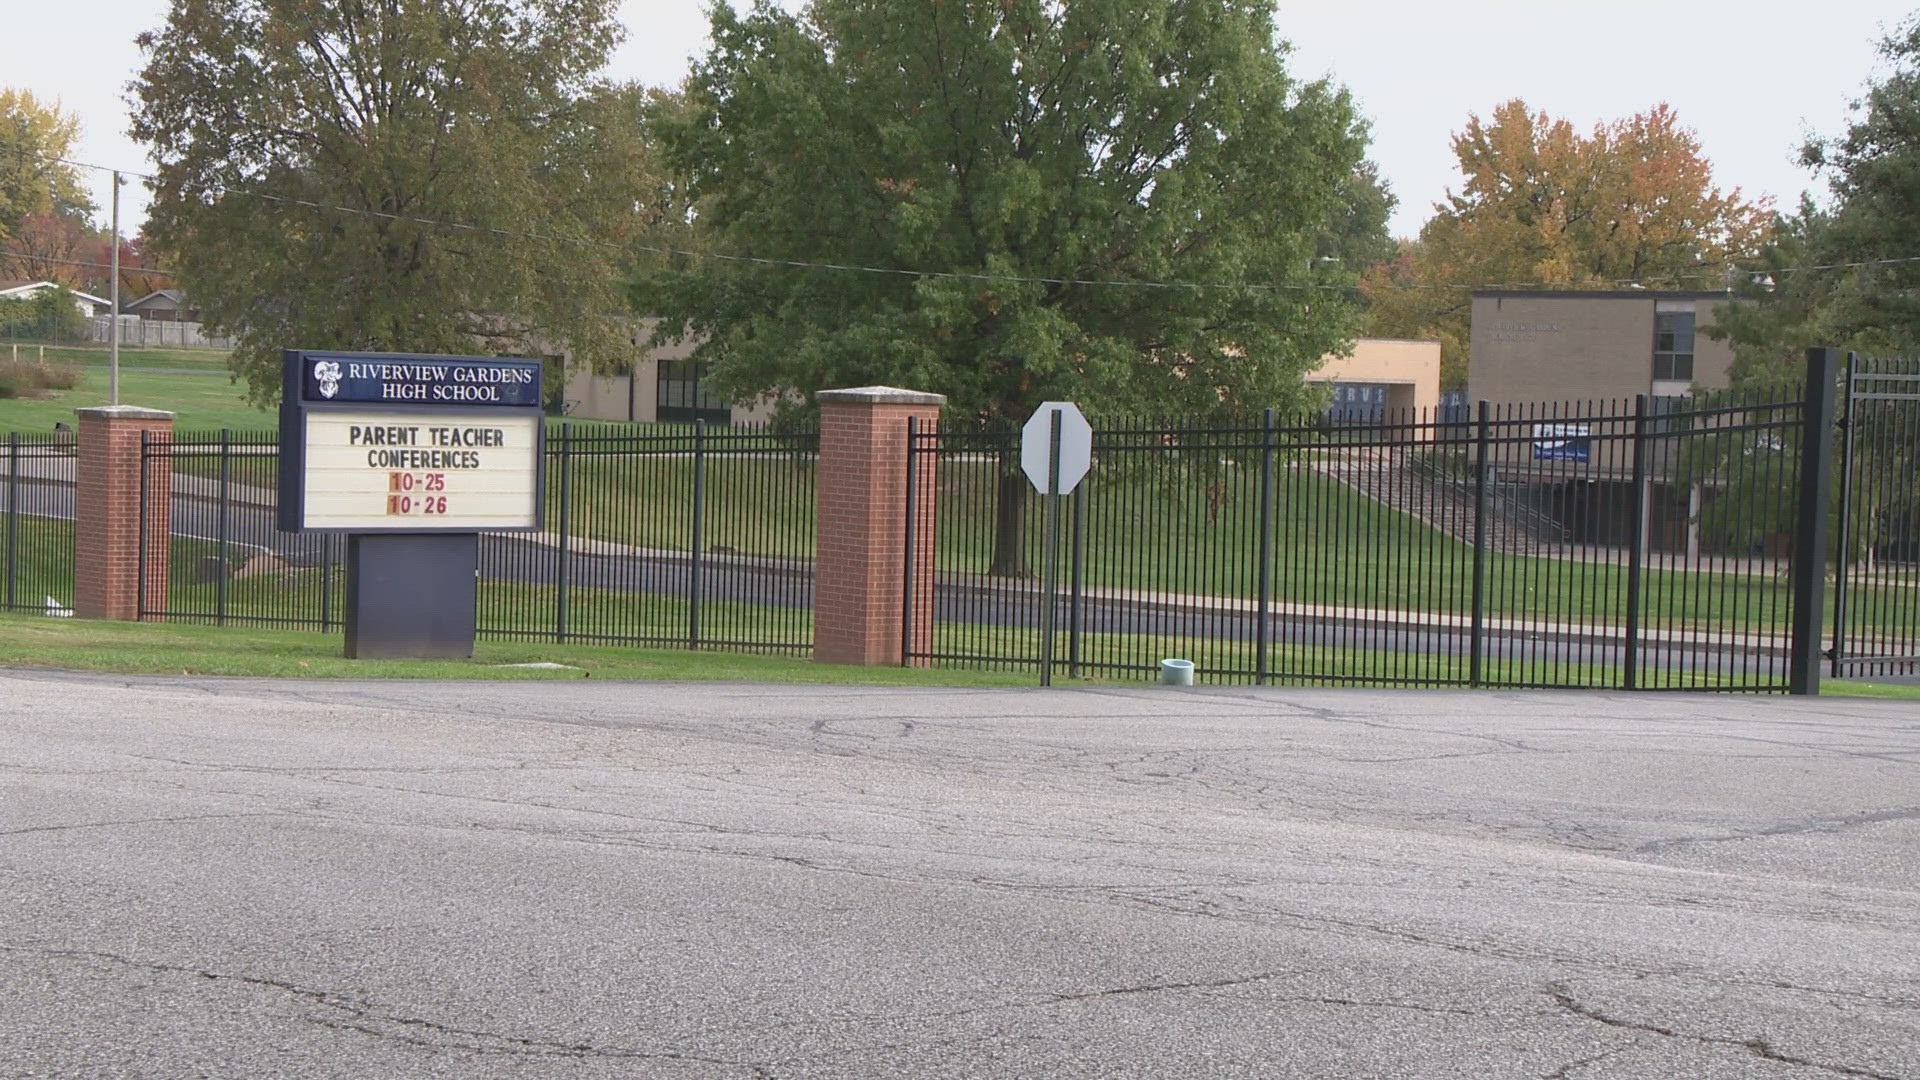 St. Louis County Police say on Thursday they were called to Riverview Gardens High School to break up a series of fights happening across campus.